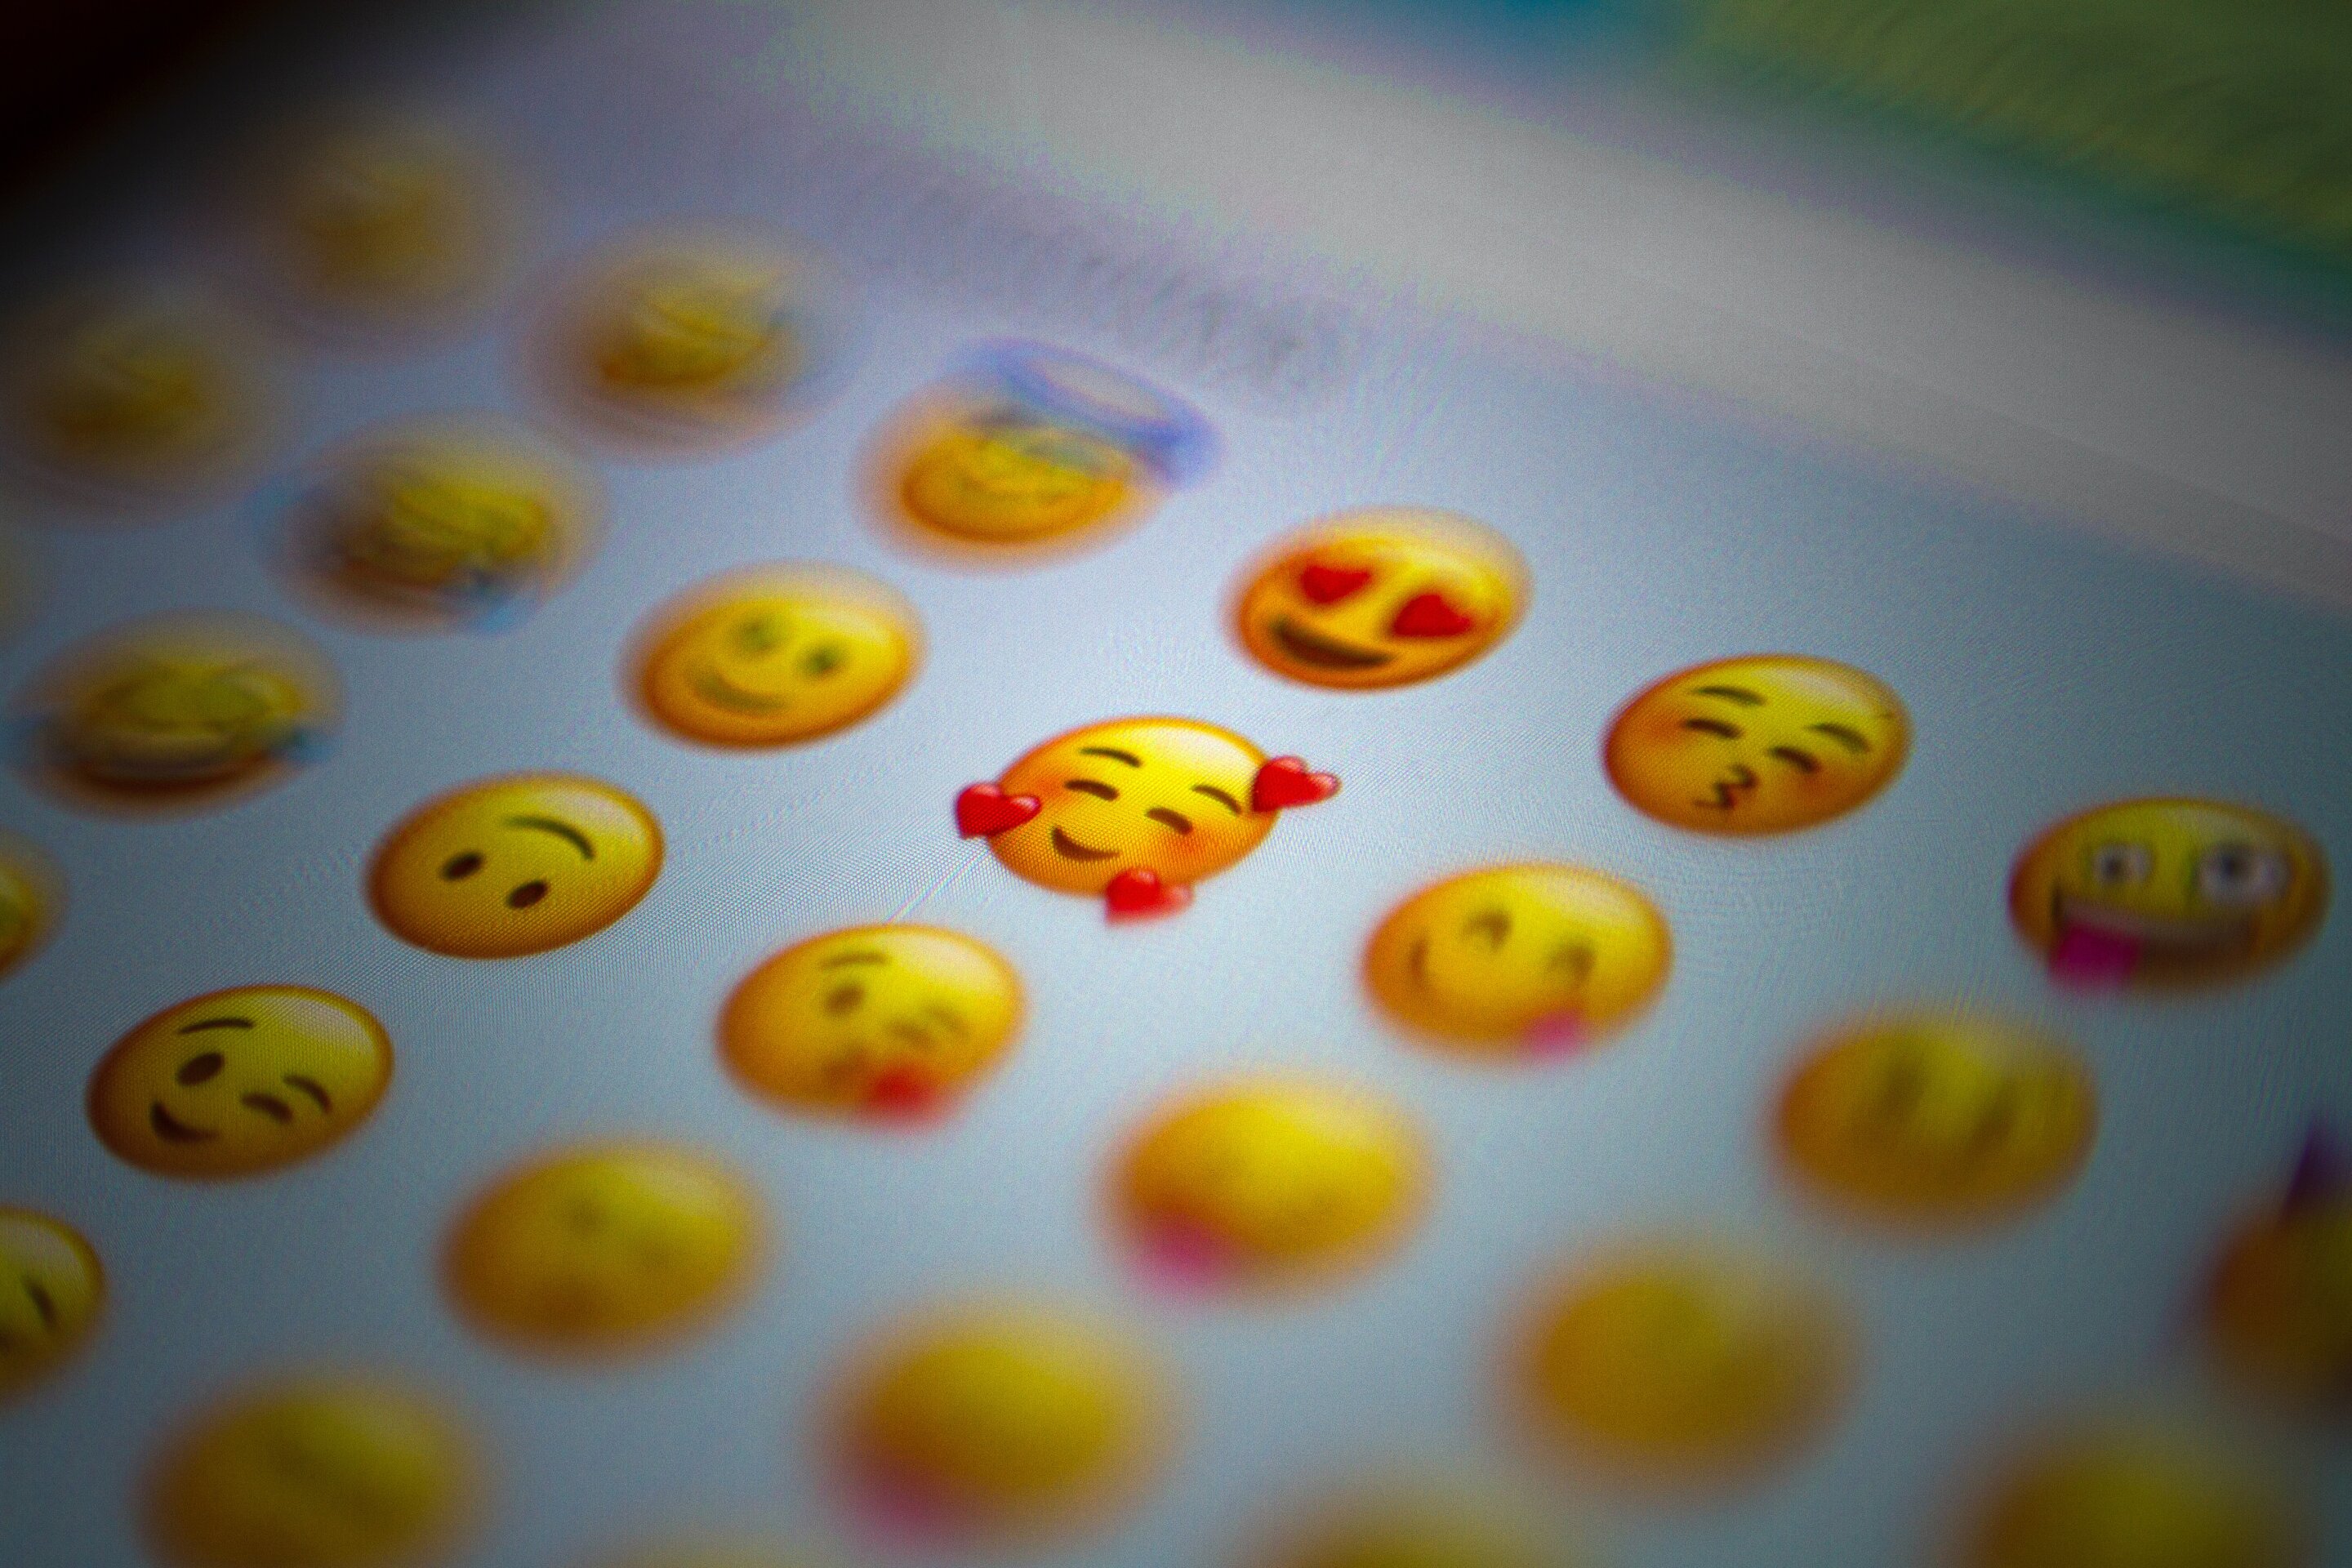 There's more to emojis than smiley faces - The Economic Times